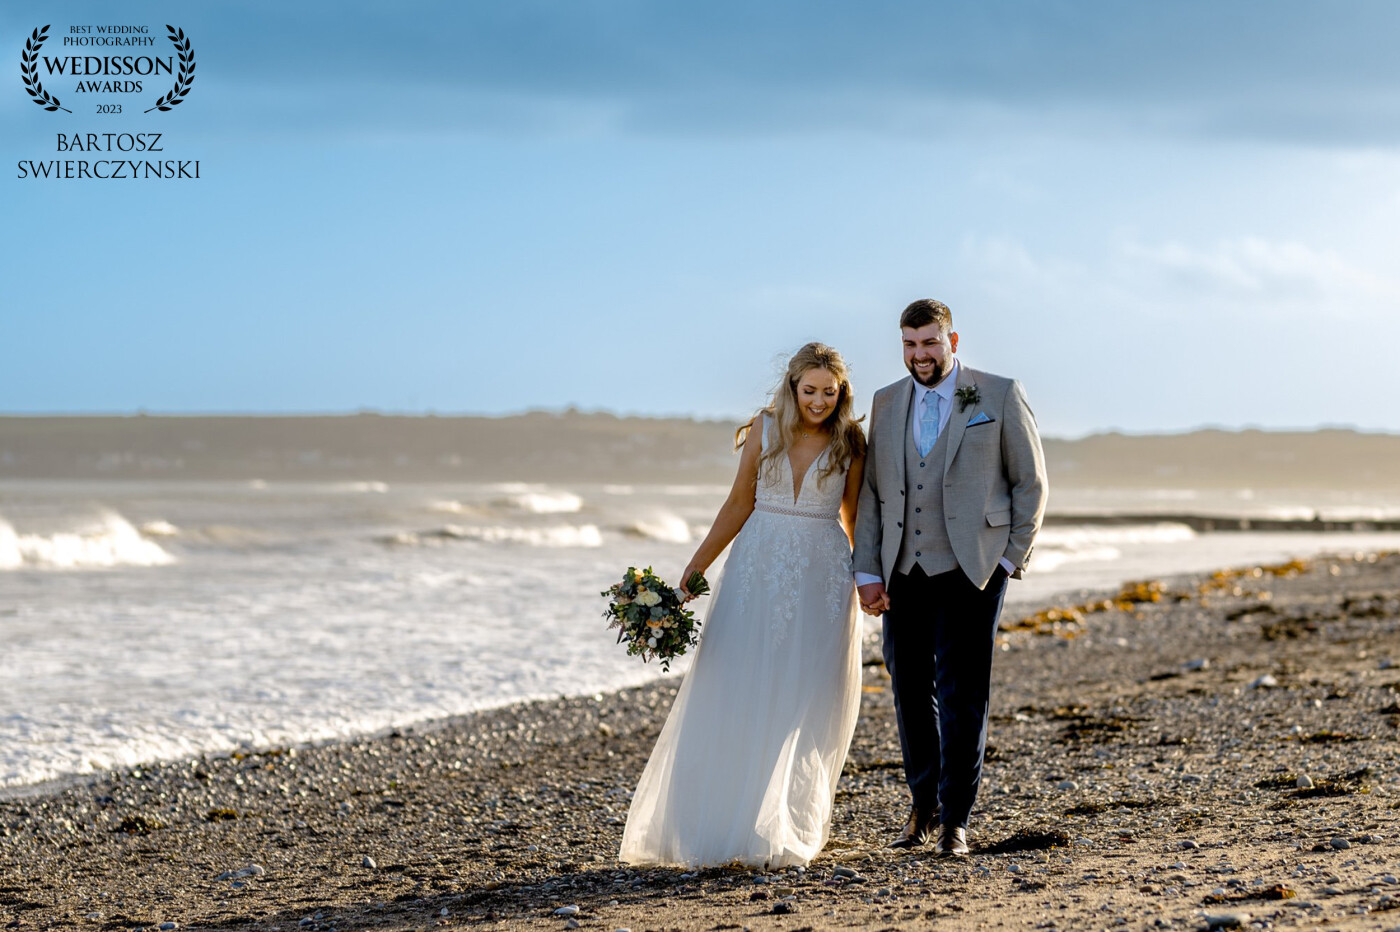 This photo was taken after the ceremony on the neighbouring beach of Garryvoe. Beth & Ryan share the peaceful moment together as they start their new life as husband and wife.